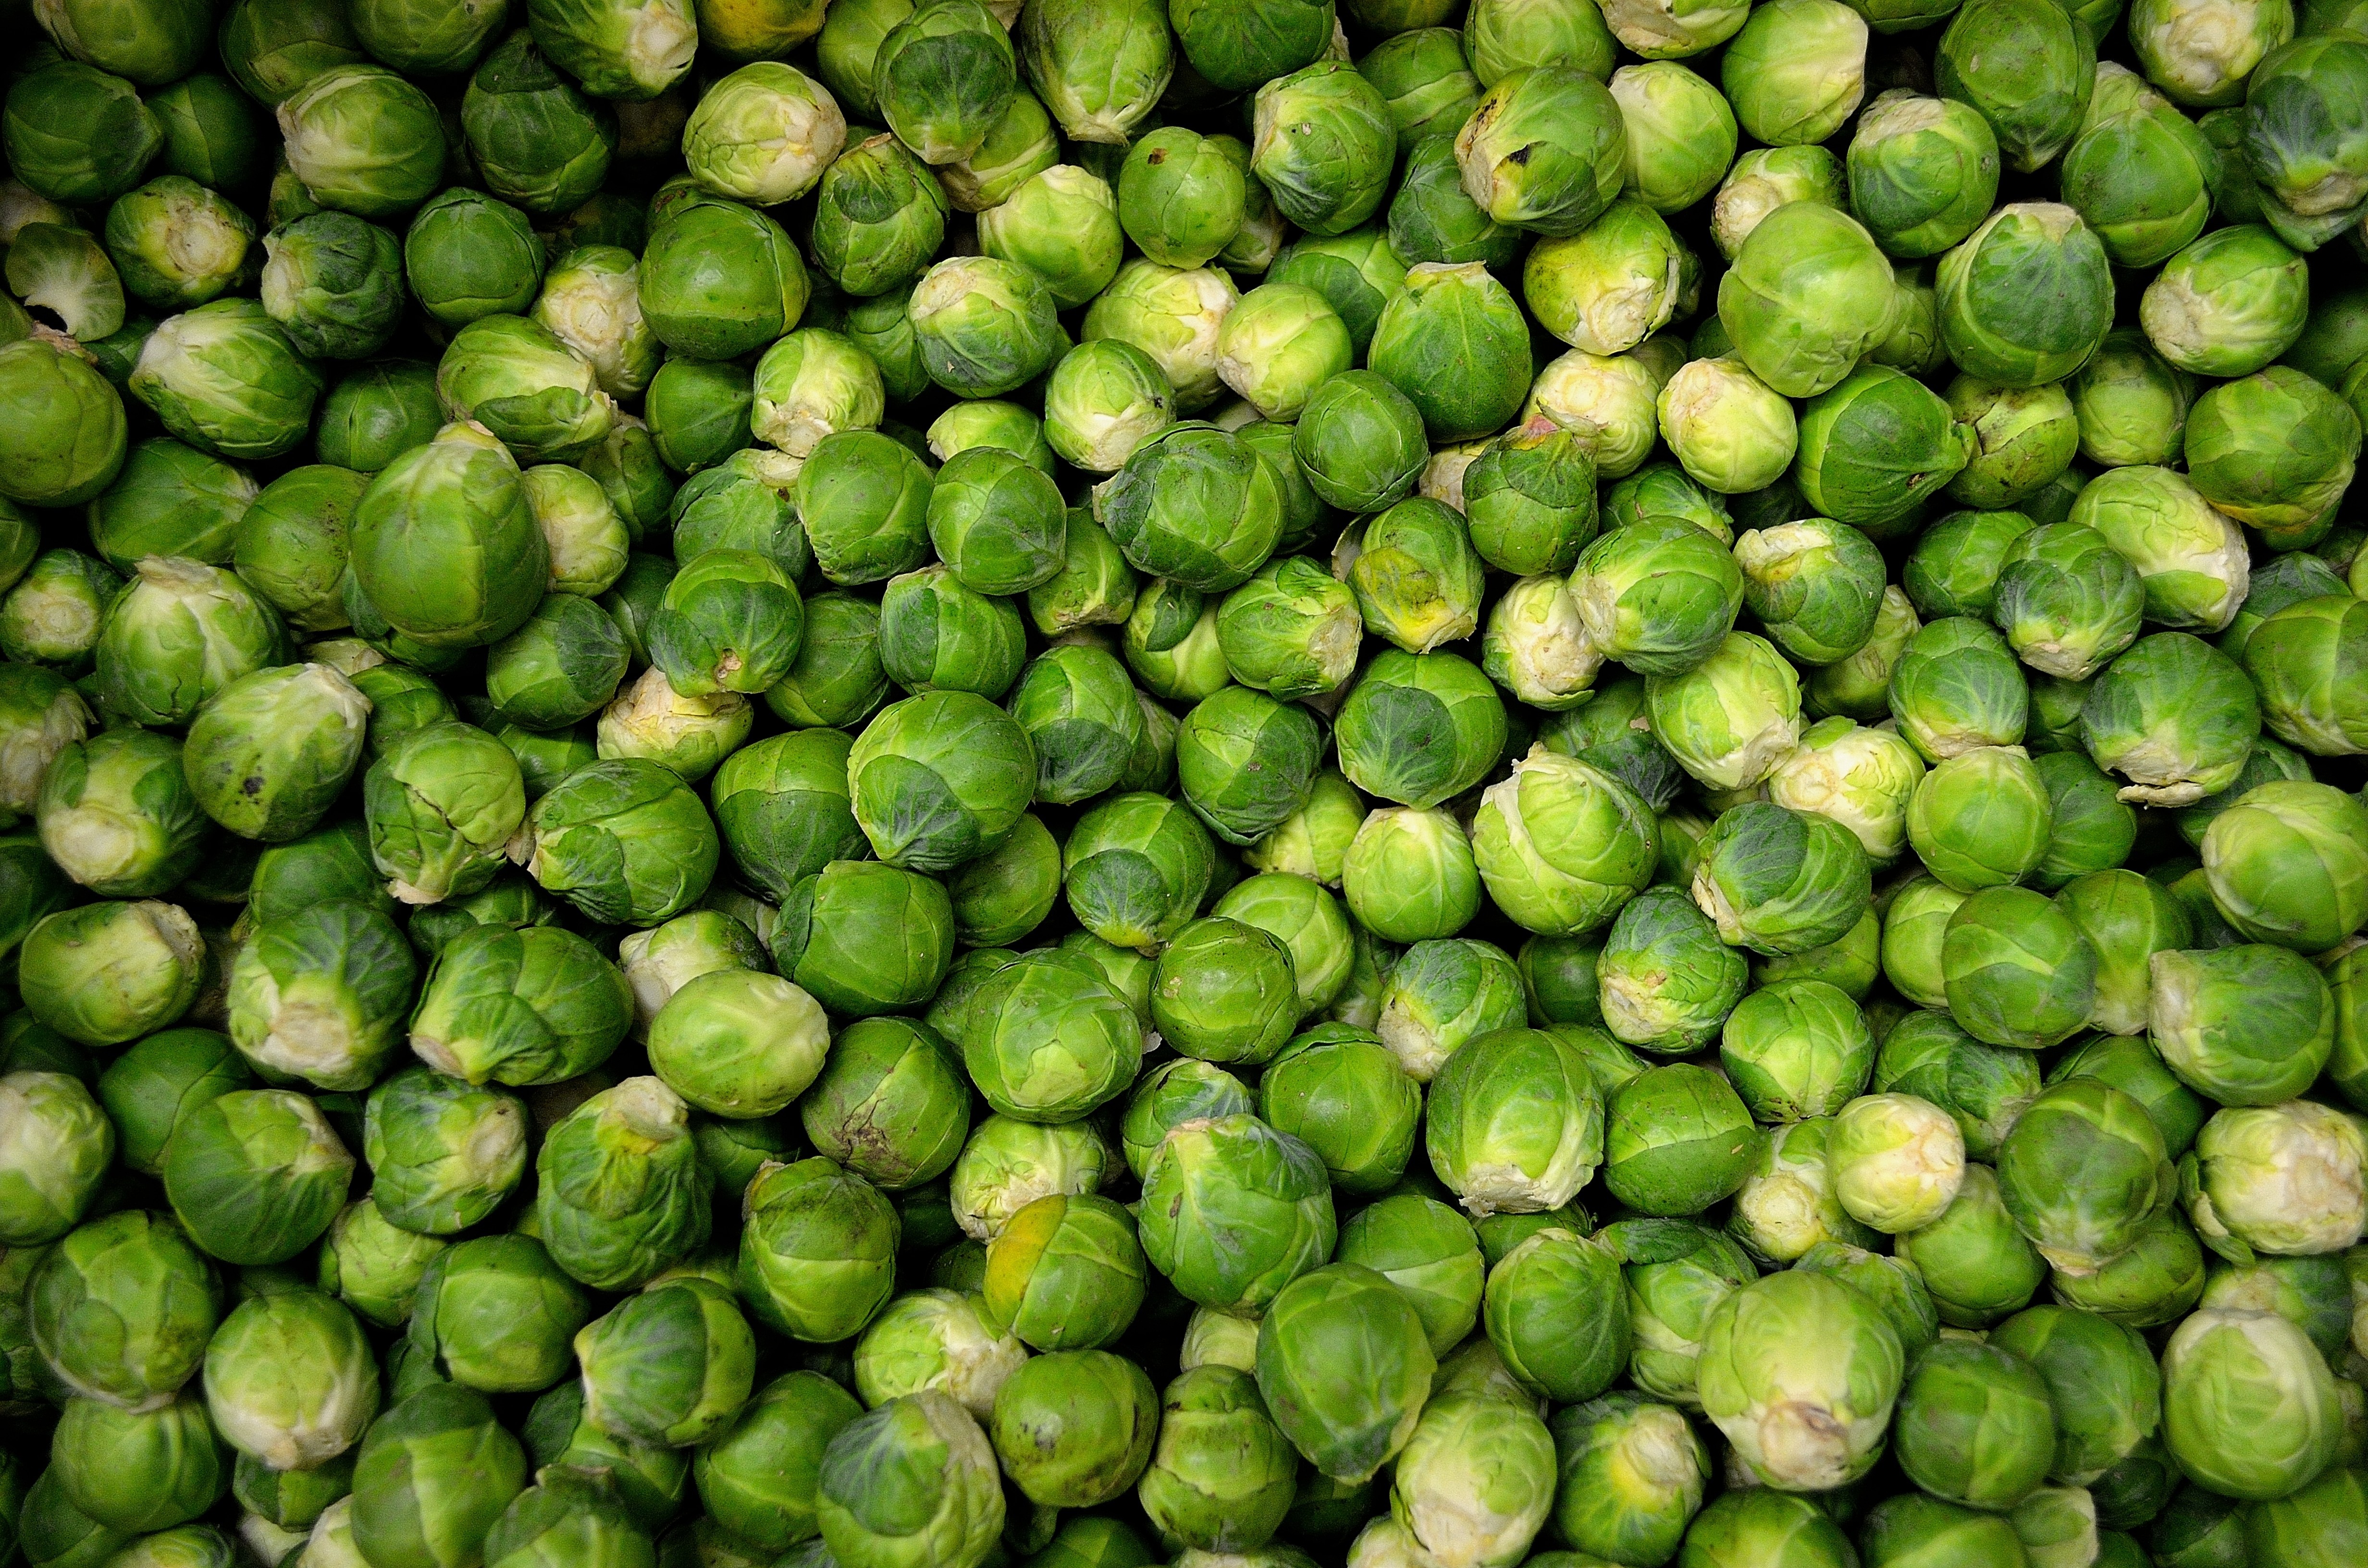 brussels-sprouts-sprouts-cabbage-grocery-41171